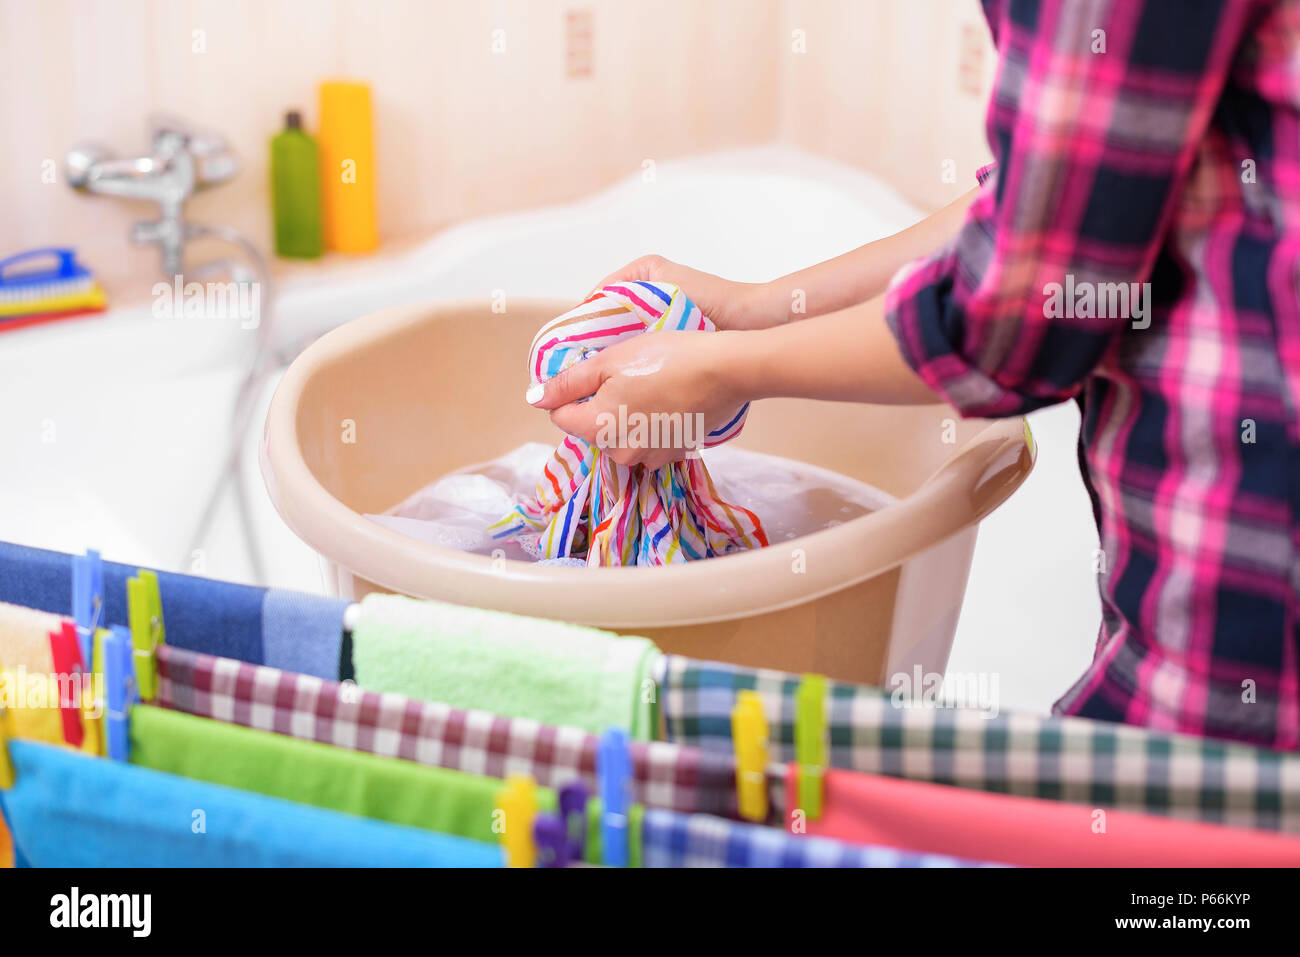 Handwash Clothes High Resolution Stock Photography And Images Alamy,How To Make Chili Gummies